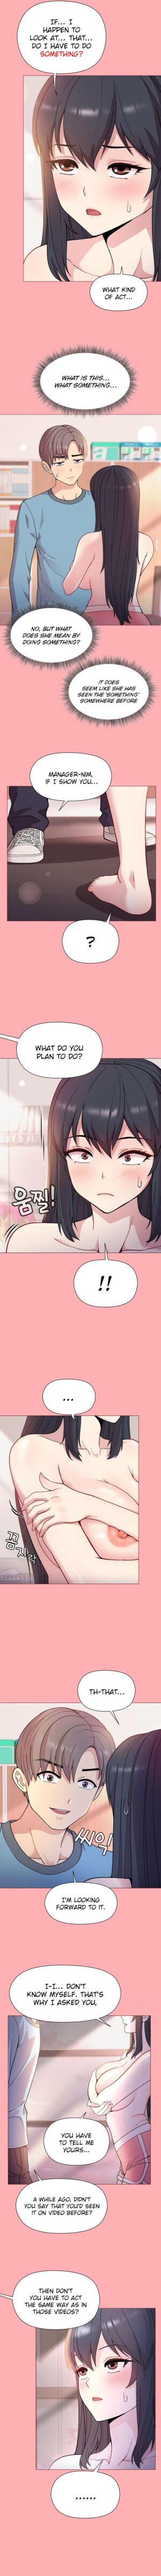 [Super Bunny / Lee Soo-yeon] Playing a Game With My Busty Manager (1-8) [English] [Omega Scans] [Ongoing]